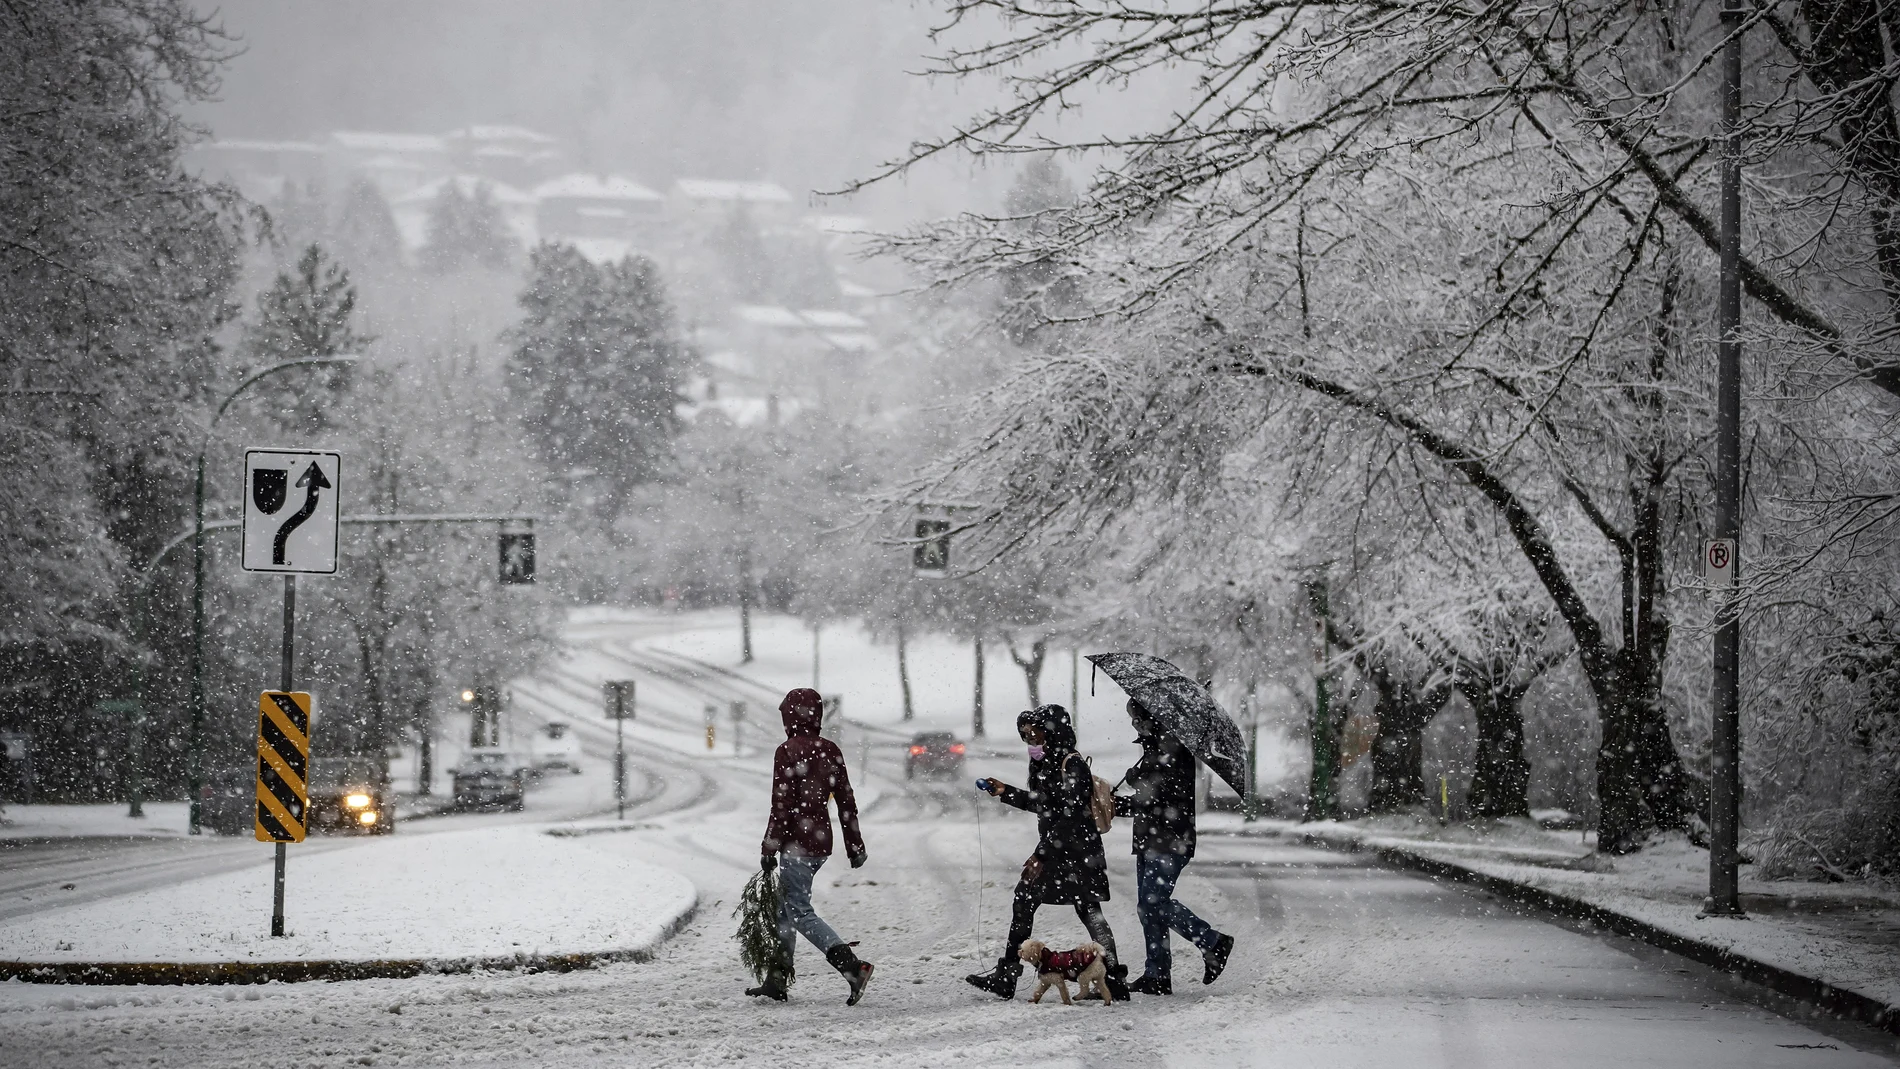 Heavy snow falls as people wearing face masks to curb the spread of COVID-19 crosses a road in Burnaby, British Columbia, on Monday, Dec. 21, 2020. Environment Canada issued a snowfall warning on the first day of winter. (Darryl Dyck/The Canadian Press via AP)